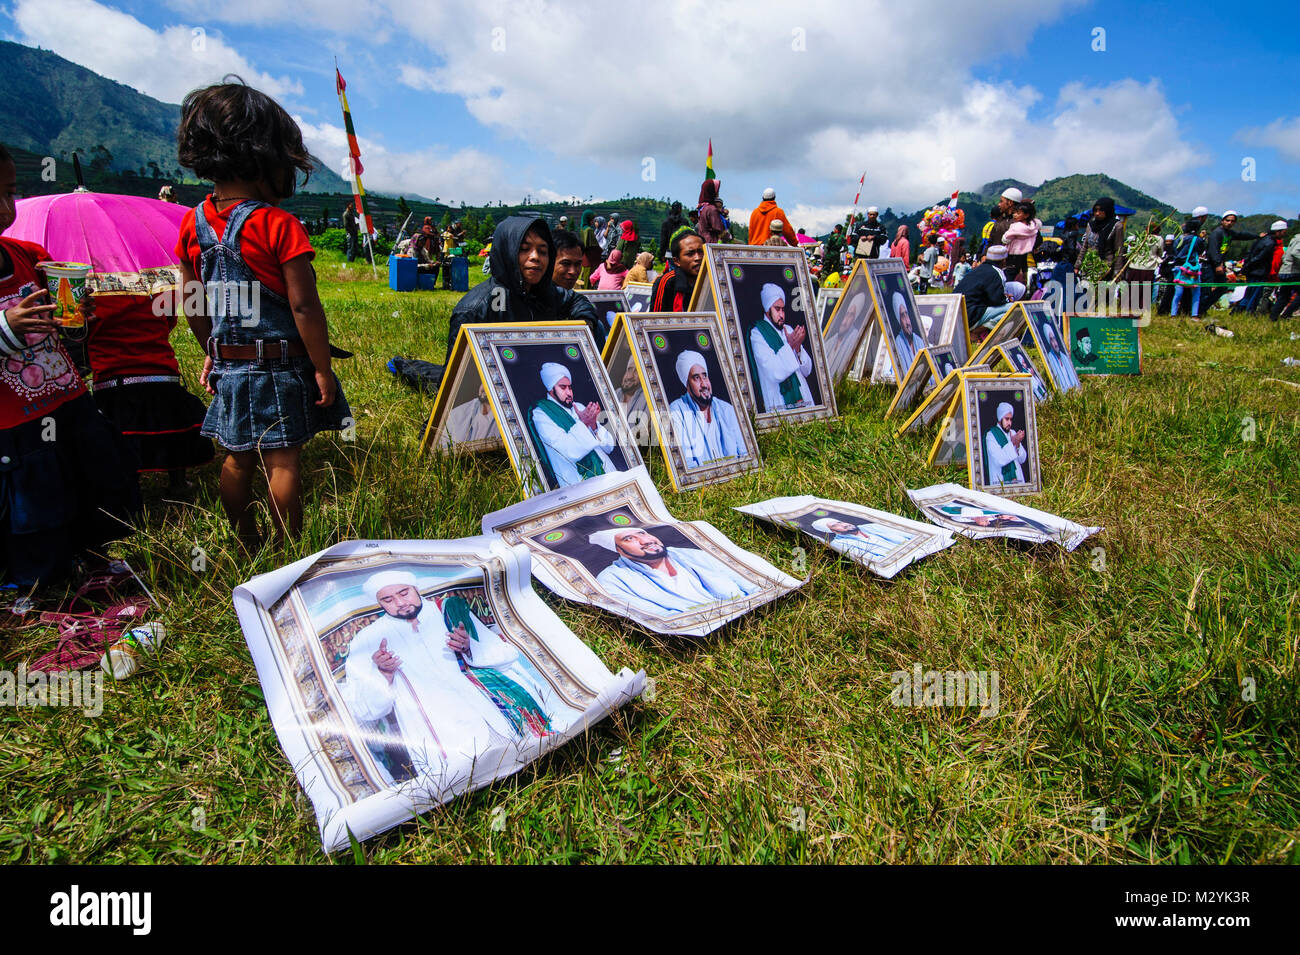 Muslim leader photos for sale at a Muslim festival at the Arjuna Hindu Dieng temple complex , Dieng Plateau, Java, Indonesia Stock Photo